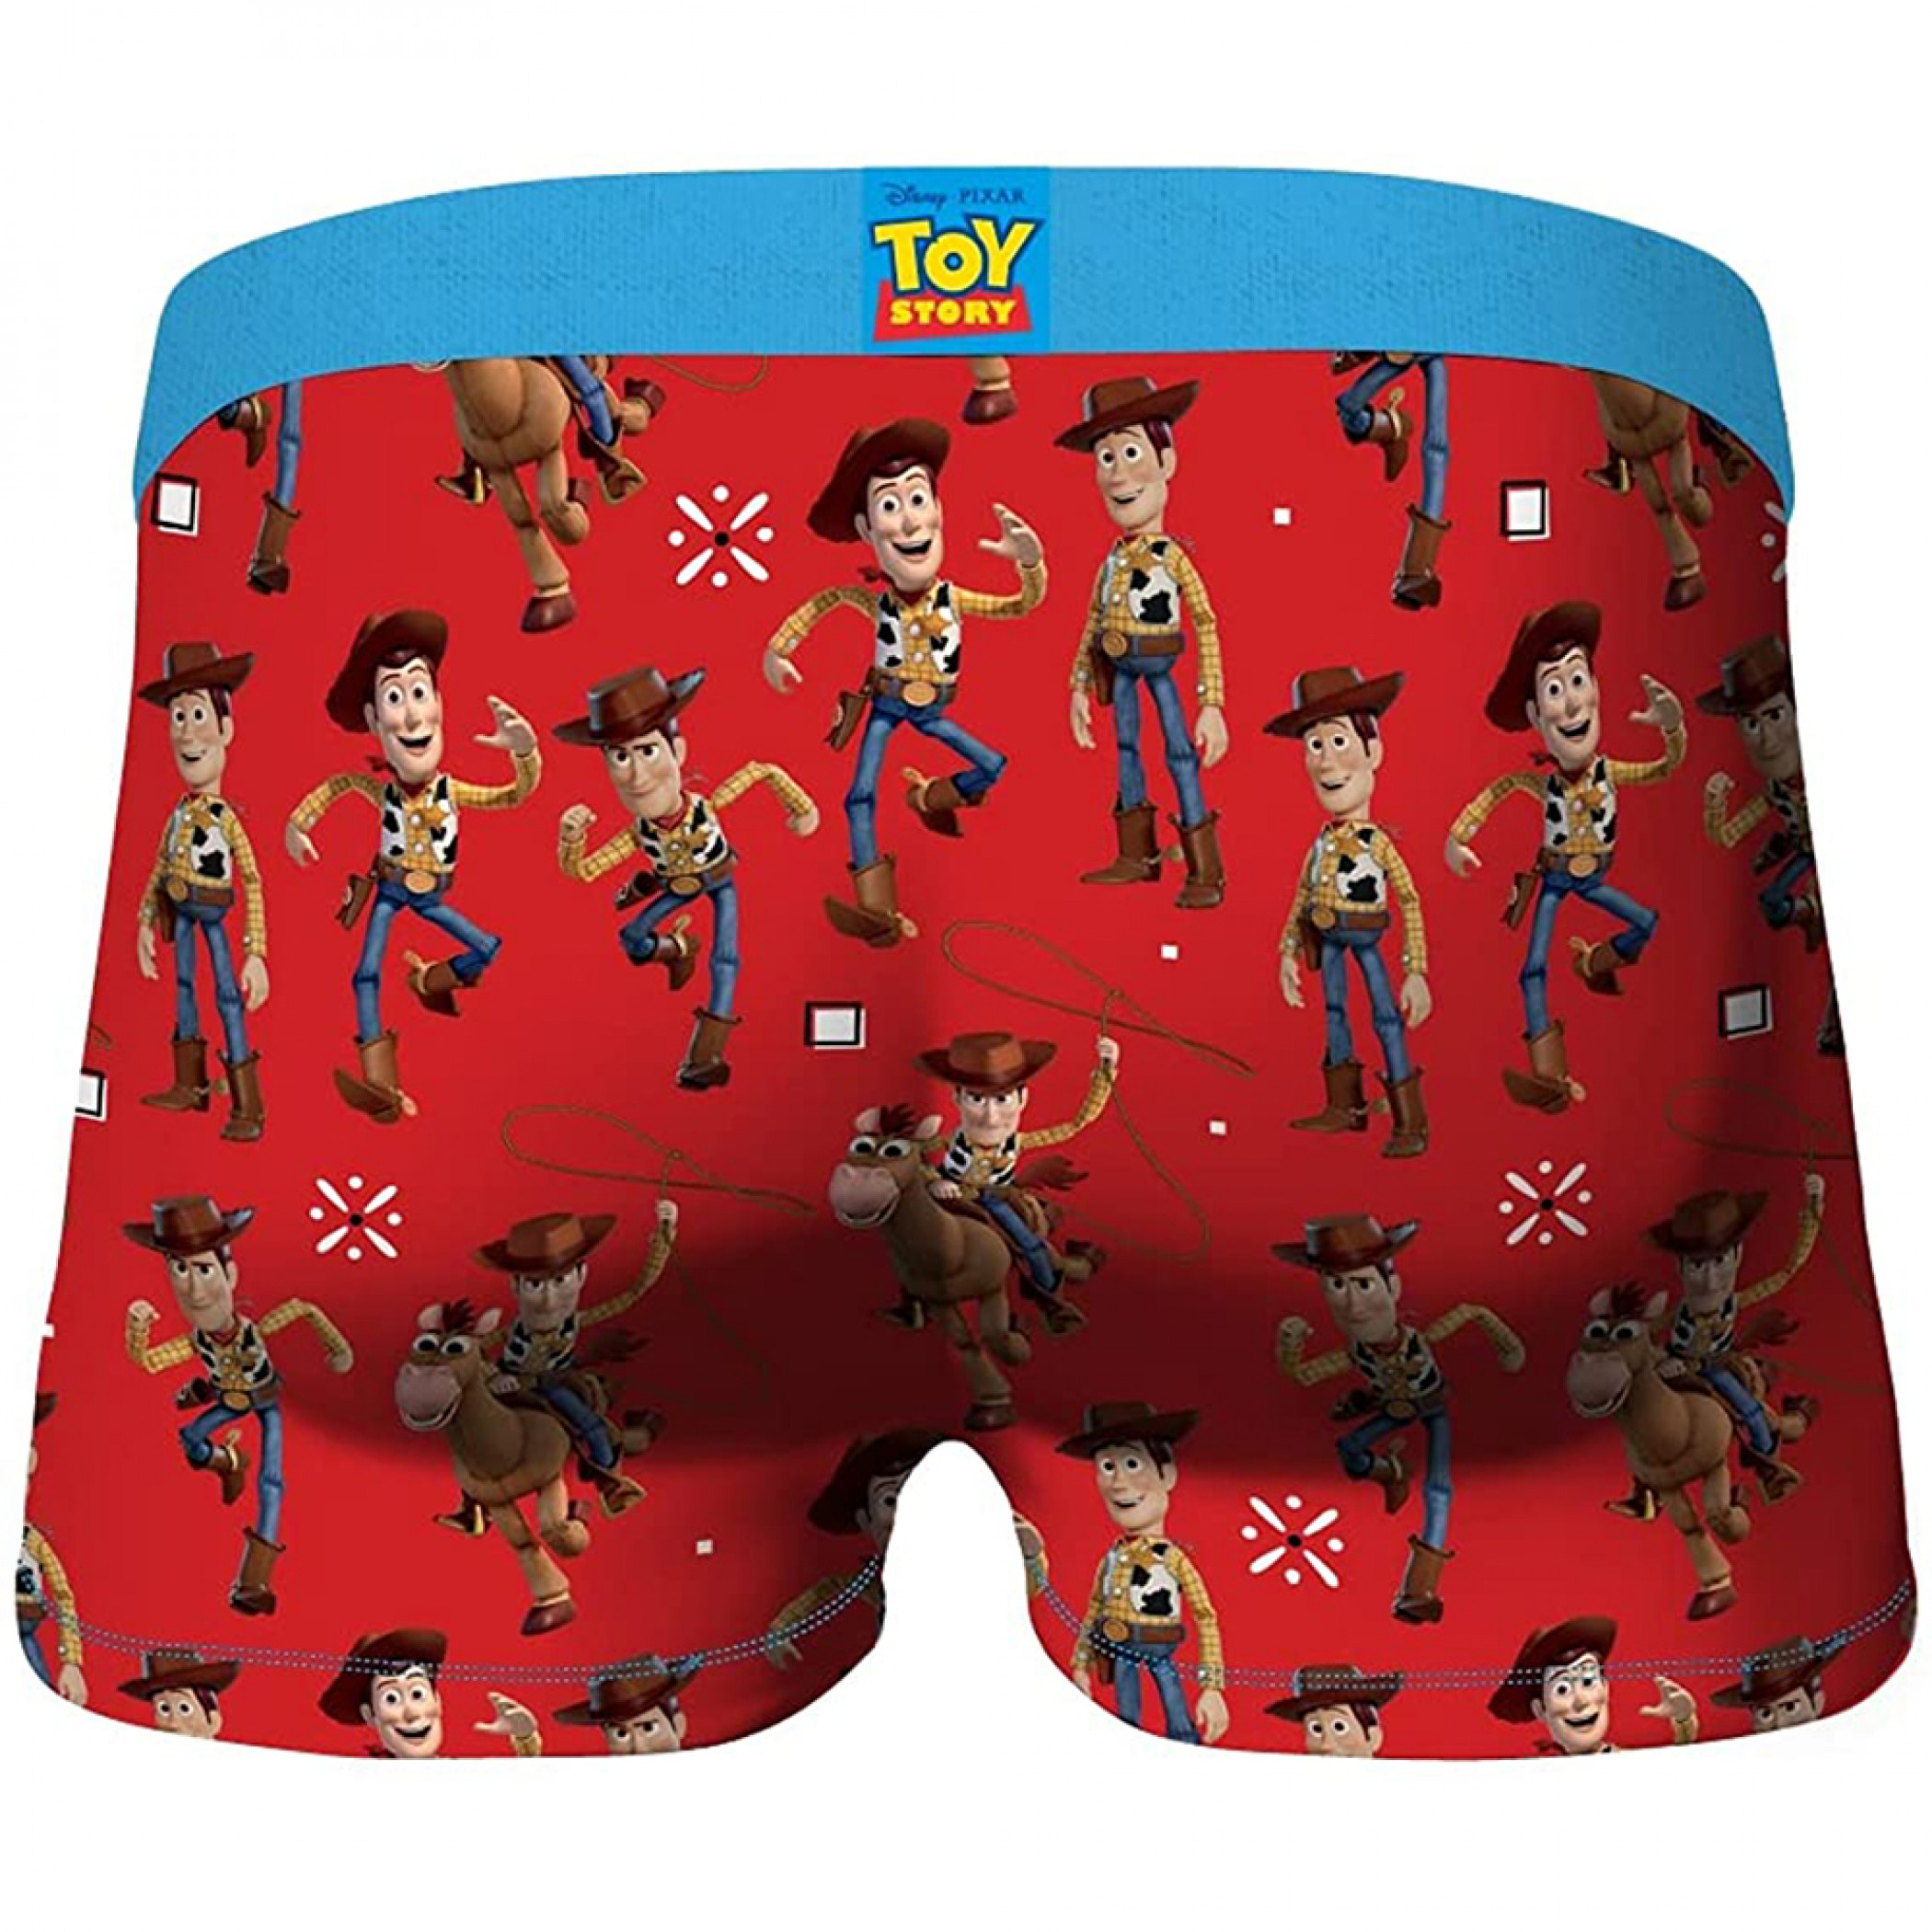 https://mmv2api.s3.us-east-2.amazonaws.com/products/images/CRAZYBOXER%20Men's%20Toy%20Story%20Woody%20Breathable%20Soft%20Micro-Stretch%20Boxer%20Briefs-1.jpg